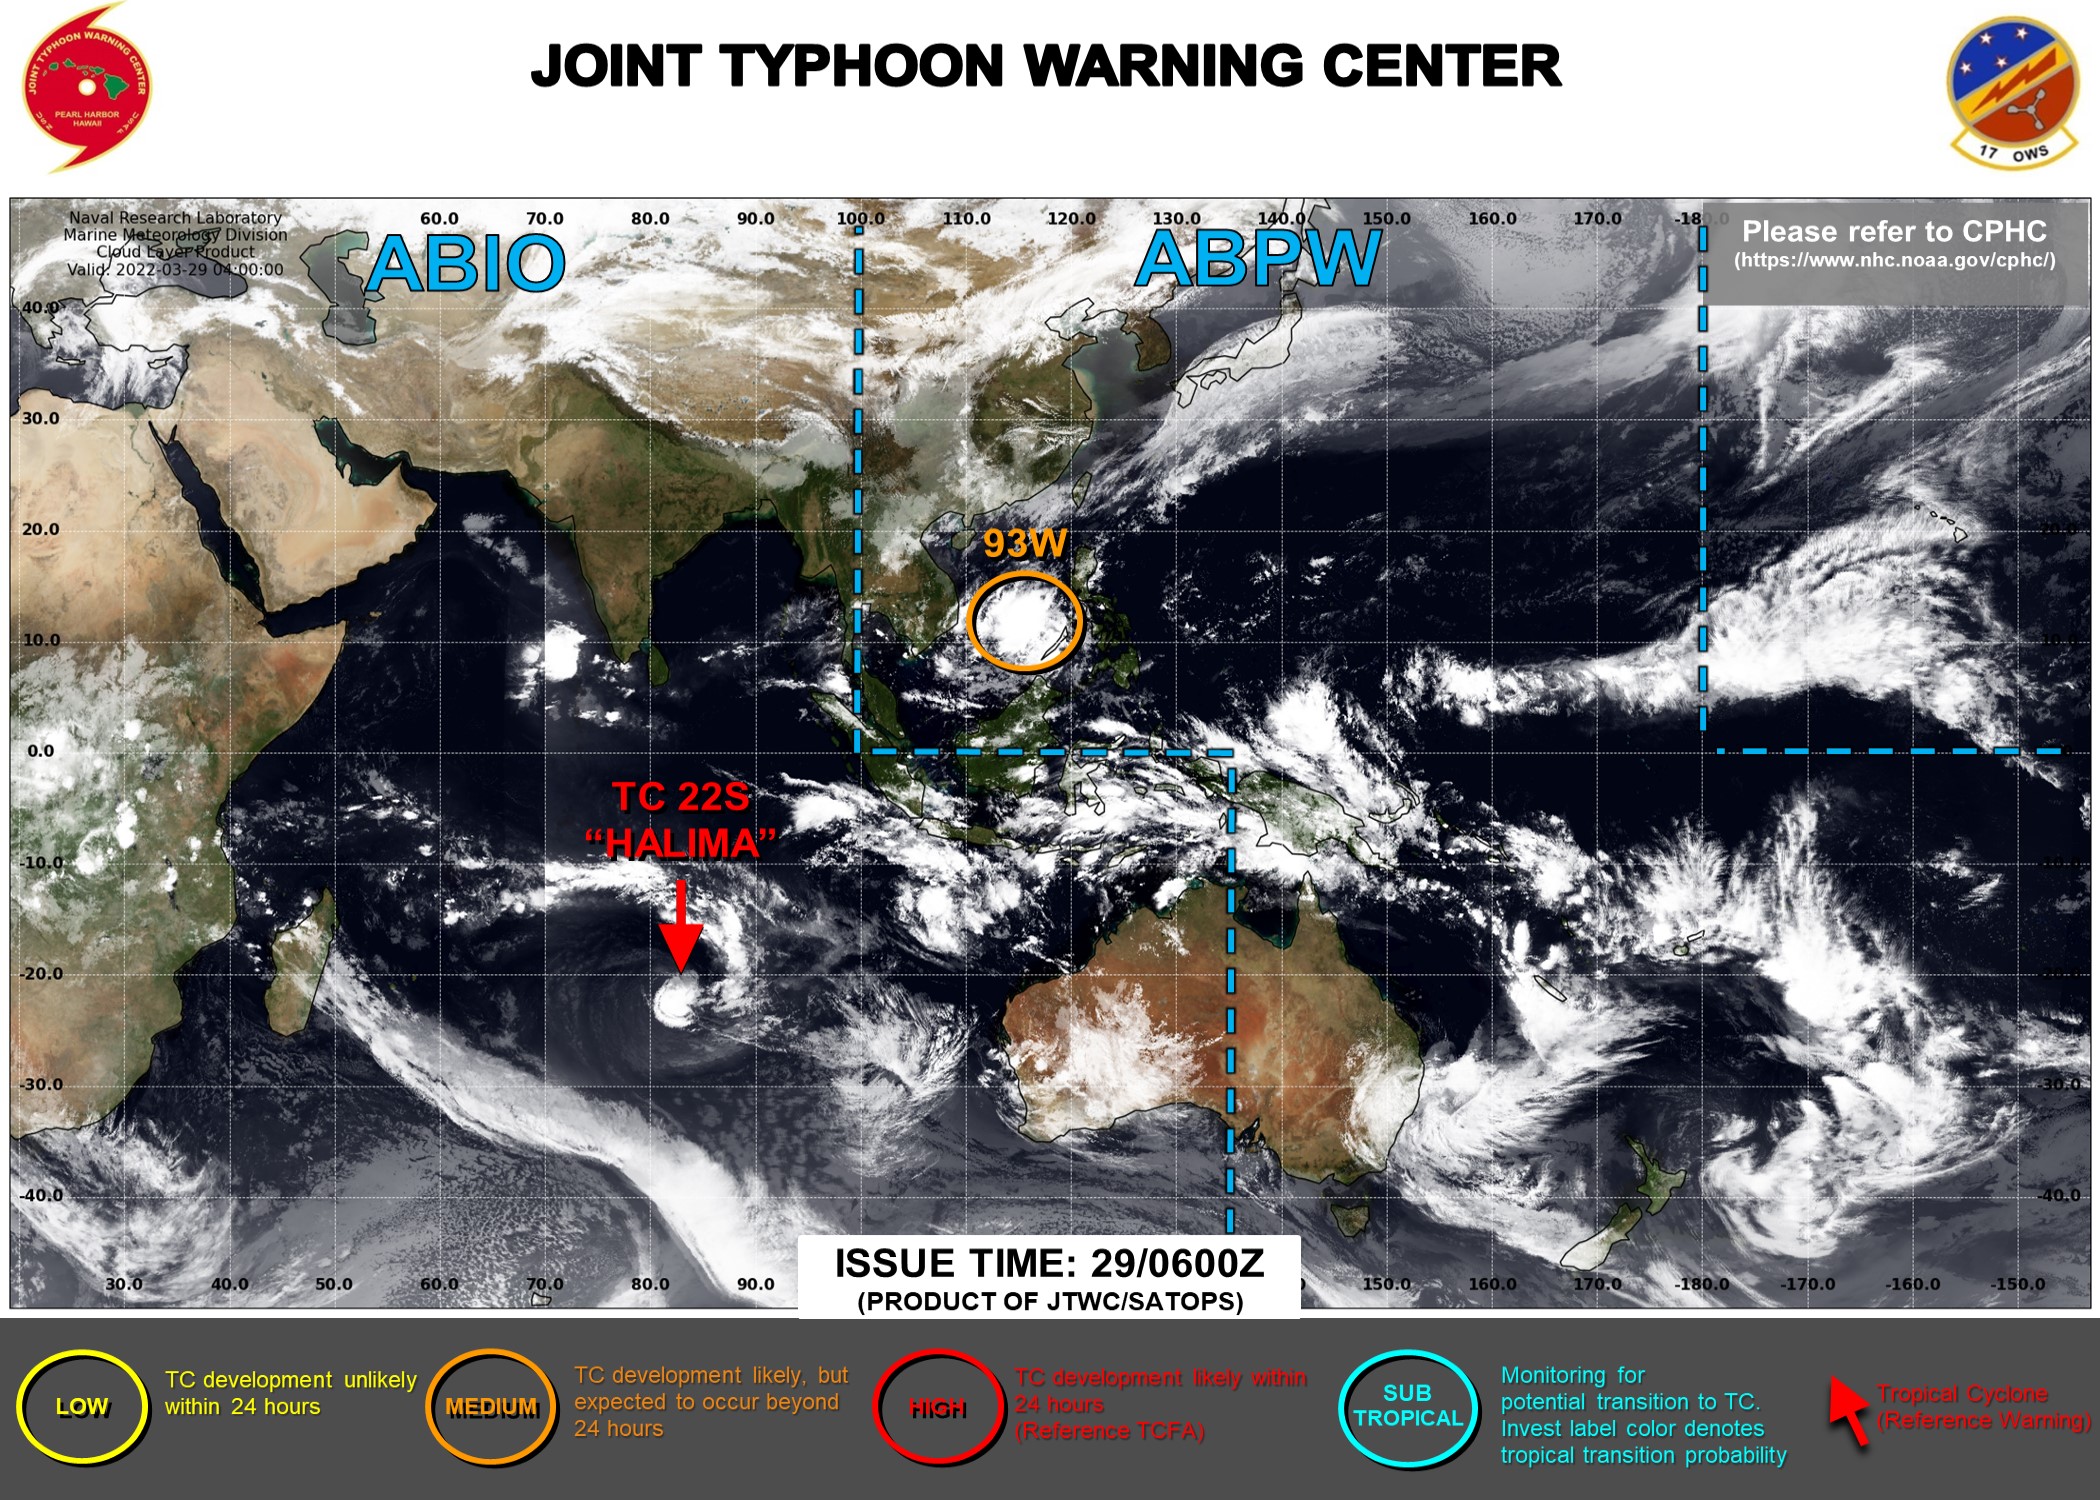 JTWC IS ISSUING 12HOURLY WARNINGS ON TC 22S(HALIMA). 3HOURLY SATELLITE BULLETINS ARE ISSUED ON TC 22S AND INVEST 97P.